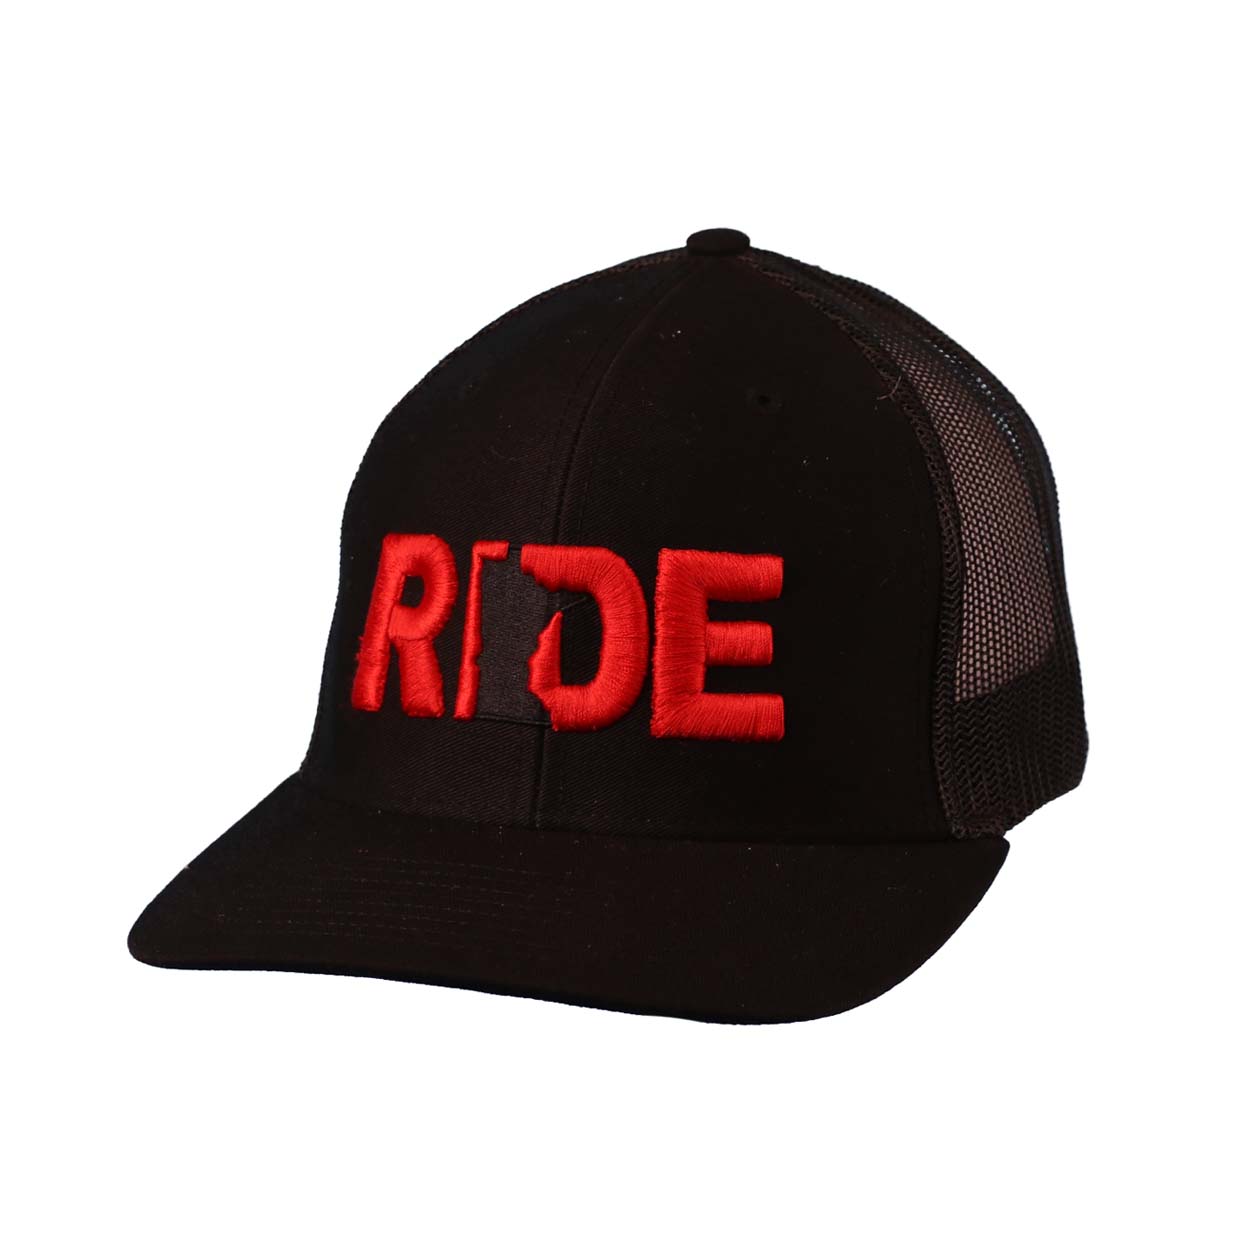 Ride Minnesota Classic Embroidered Snapback Trucker Hat Black/Red